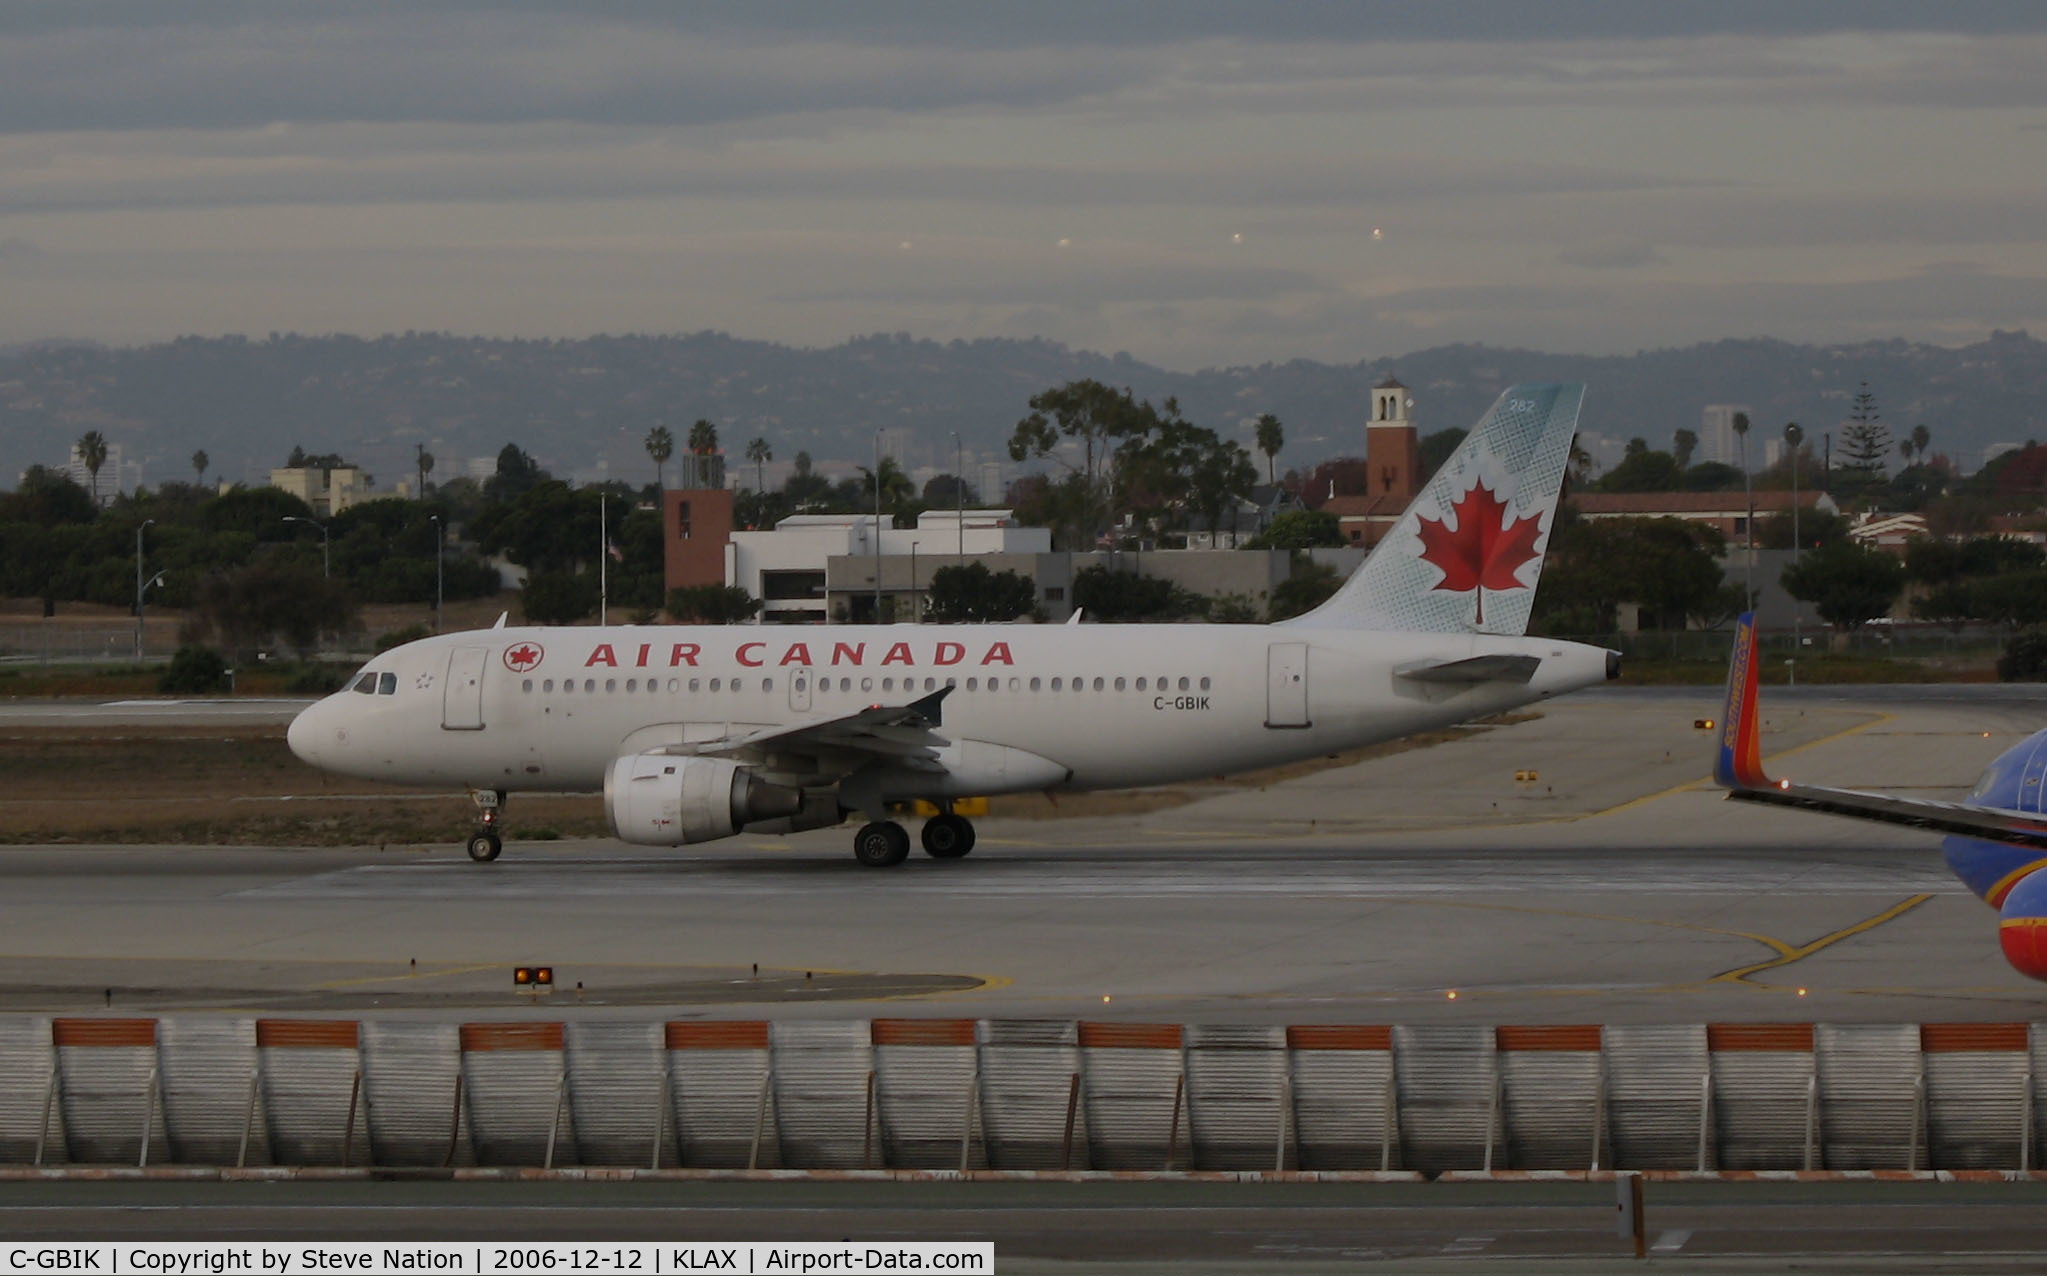 C-GBIK, 1998 Airbus A319-114 C/N 831, Air Canada 1998 Airbus A319-114 lines up for takeoff @ LAX in late afternoon